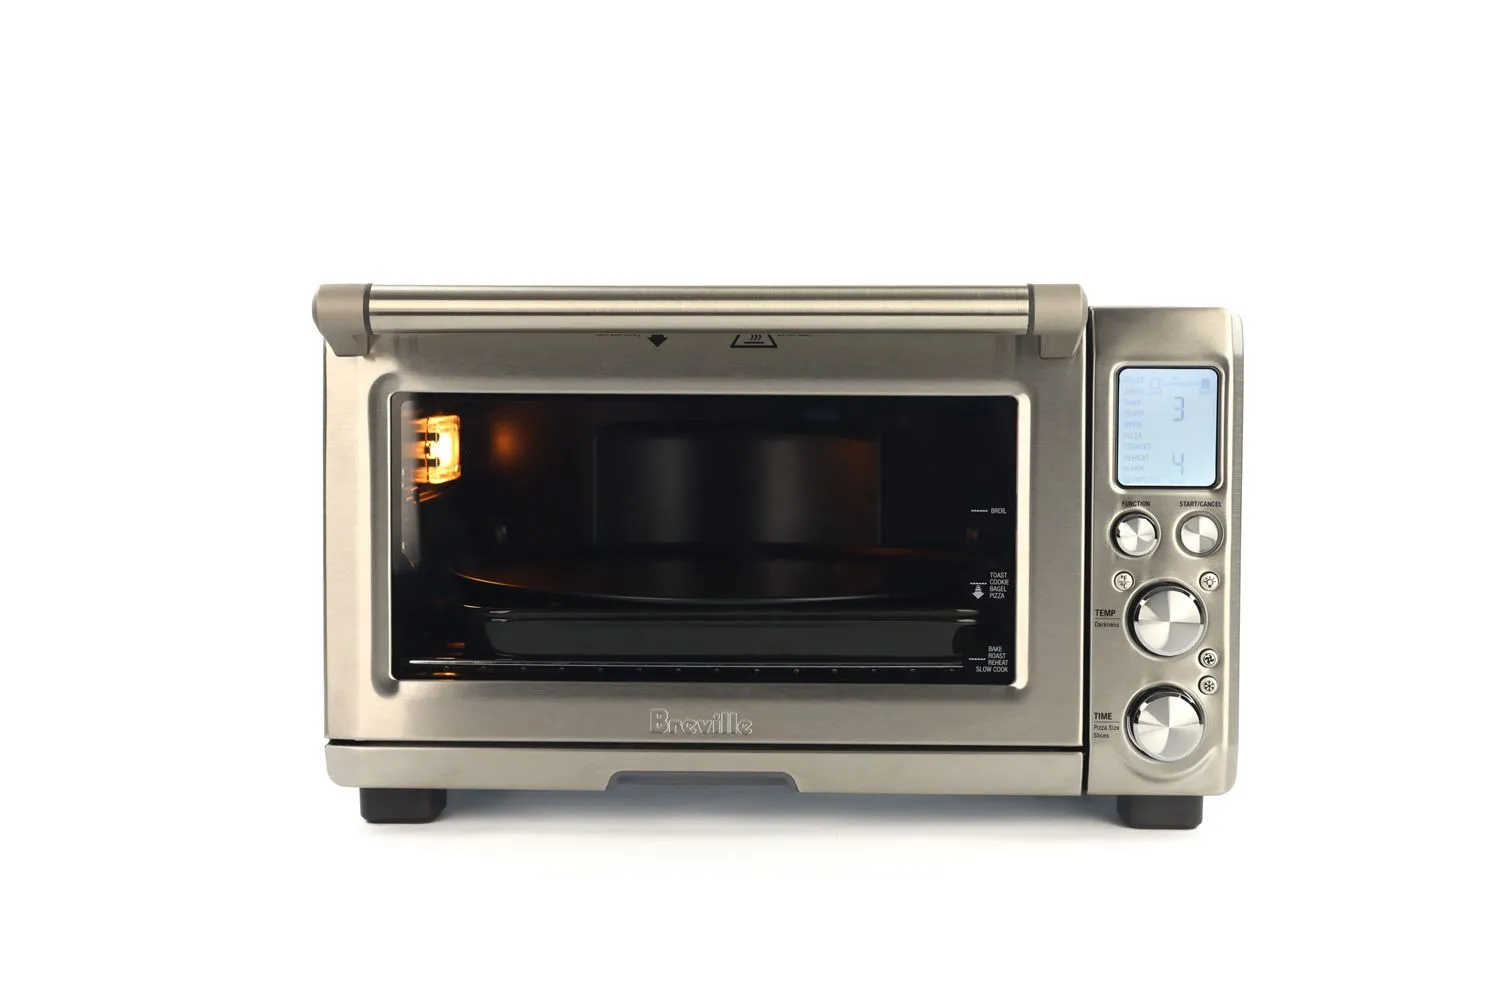 Breville Smart Oven review: Not connected, but still smartly